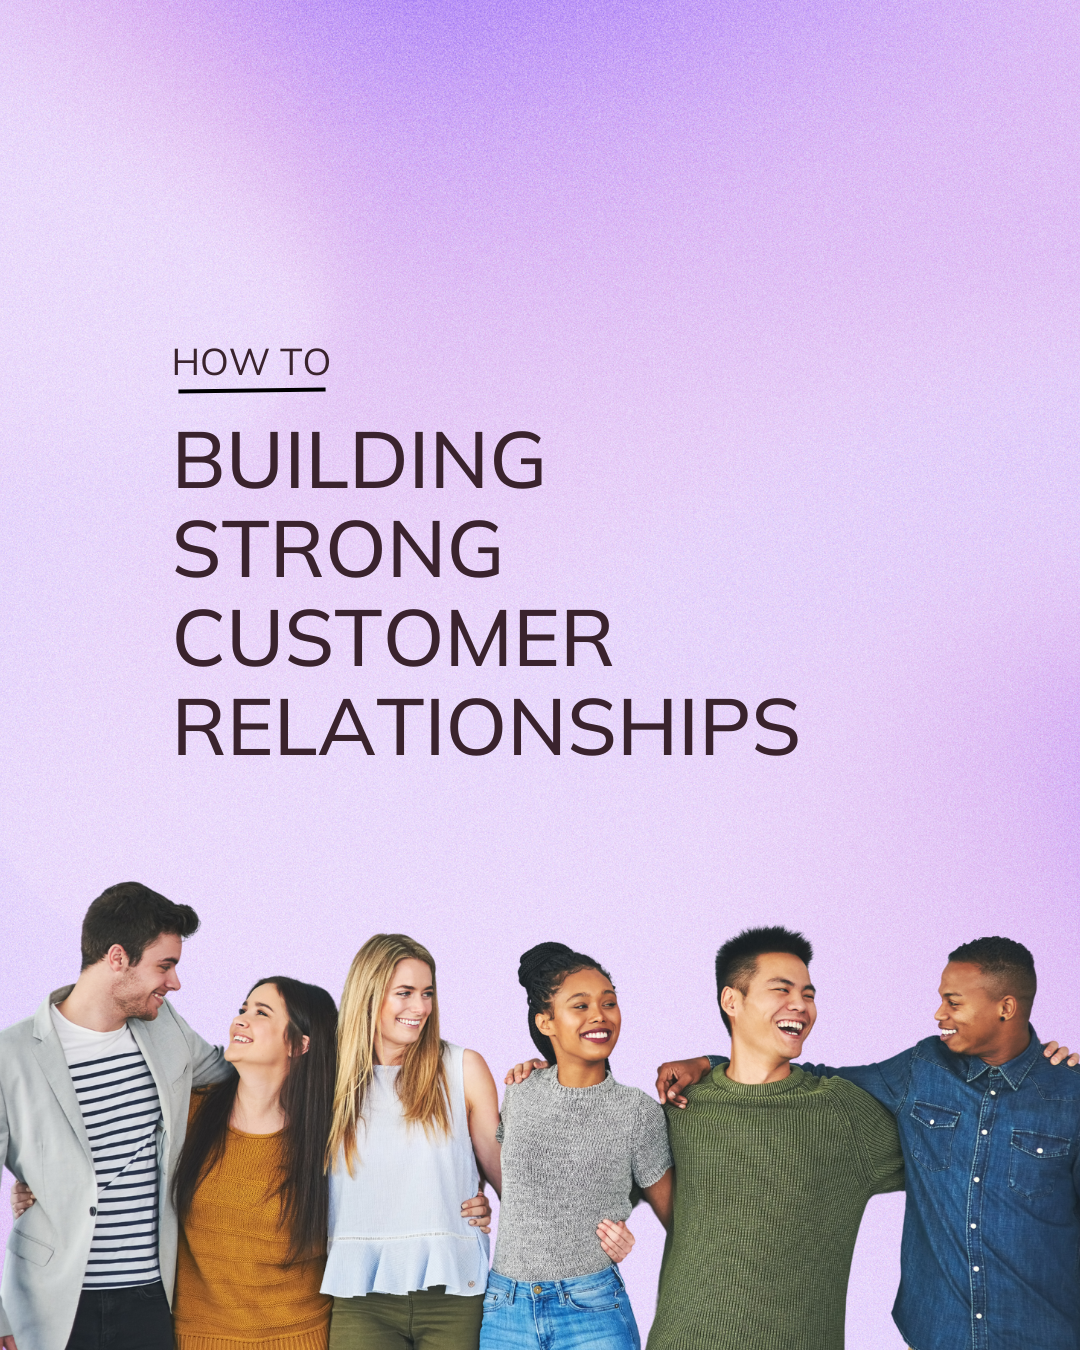 5 strategies to build stronger customer relationships. Flywheel Strategy.